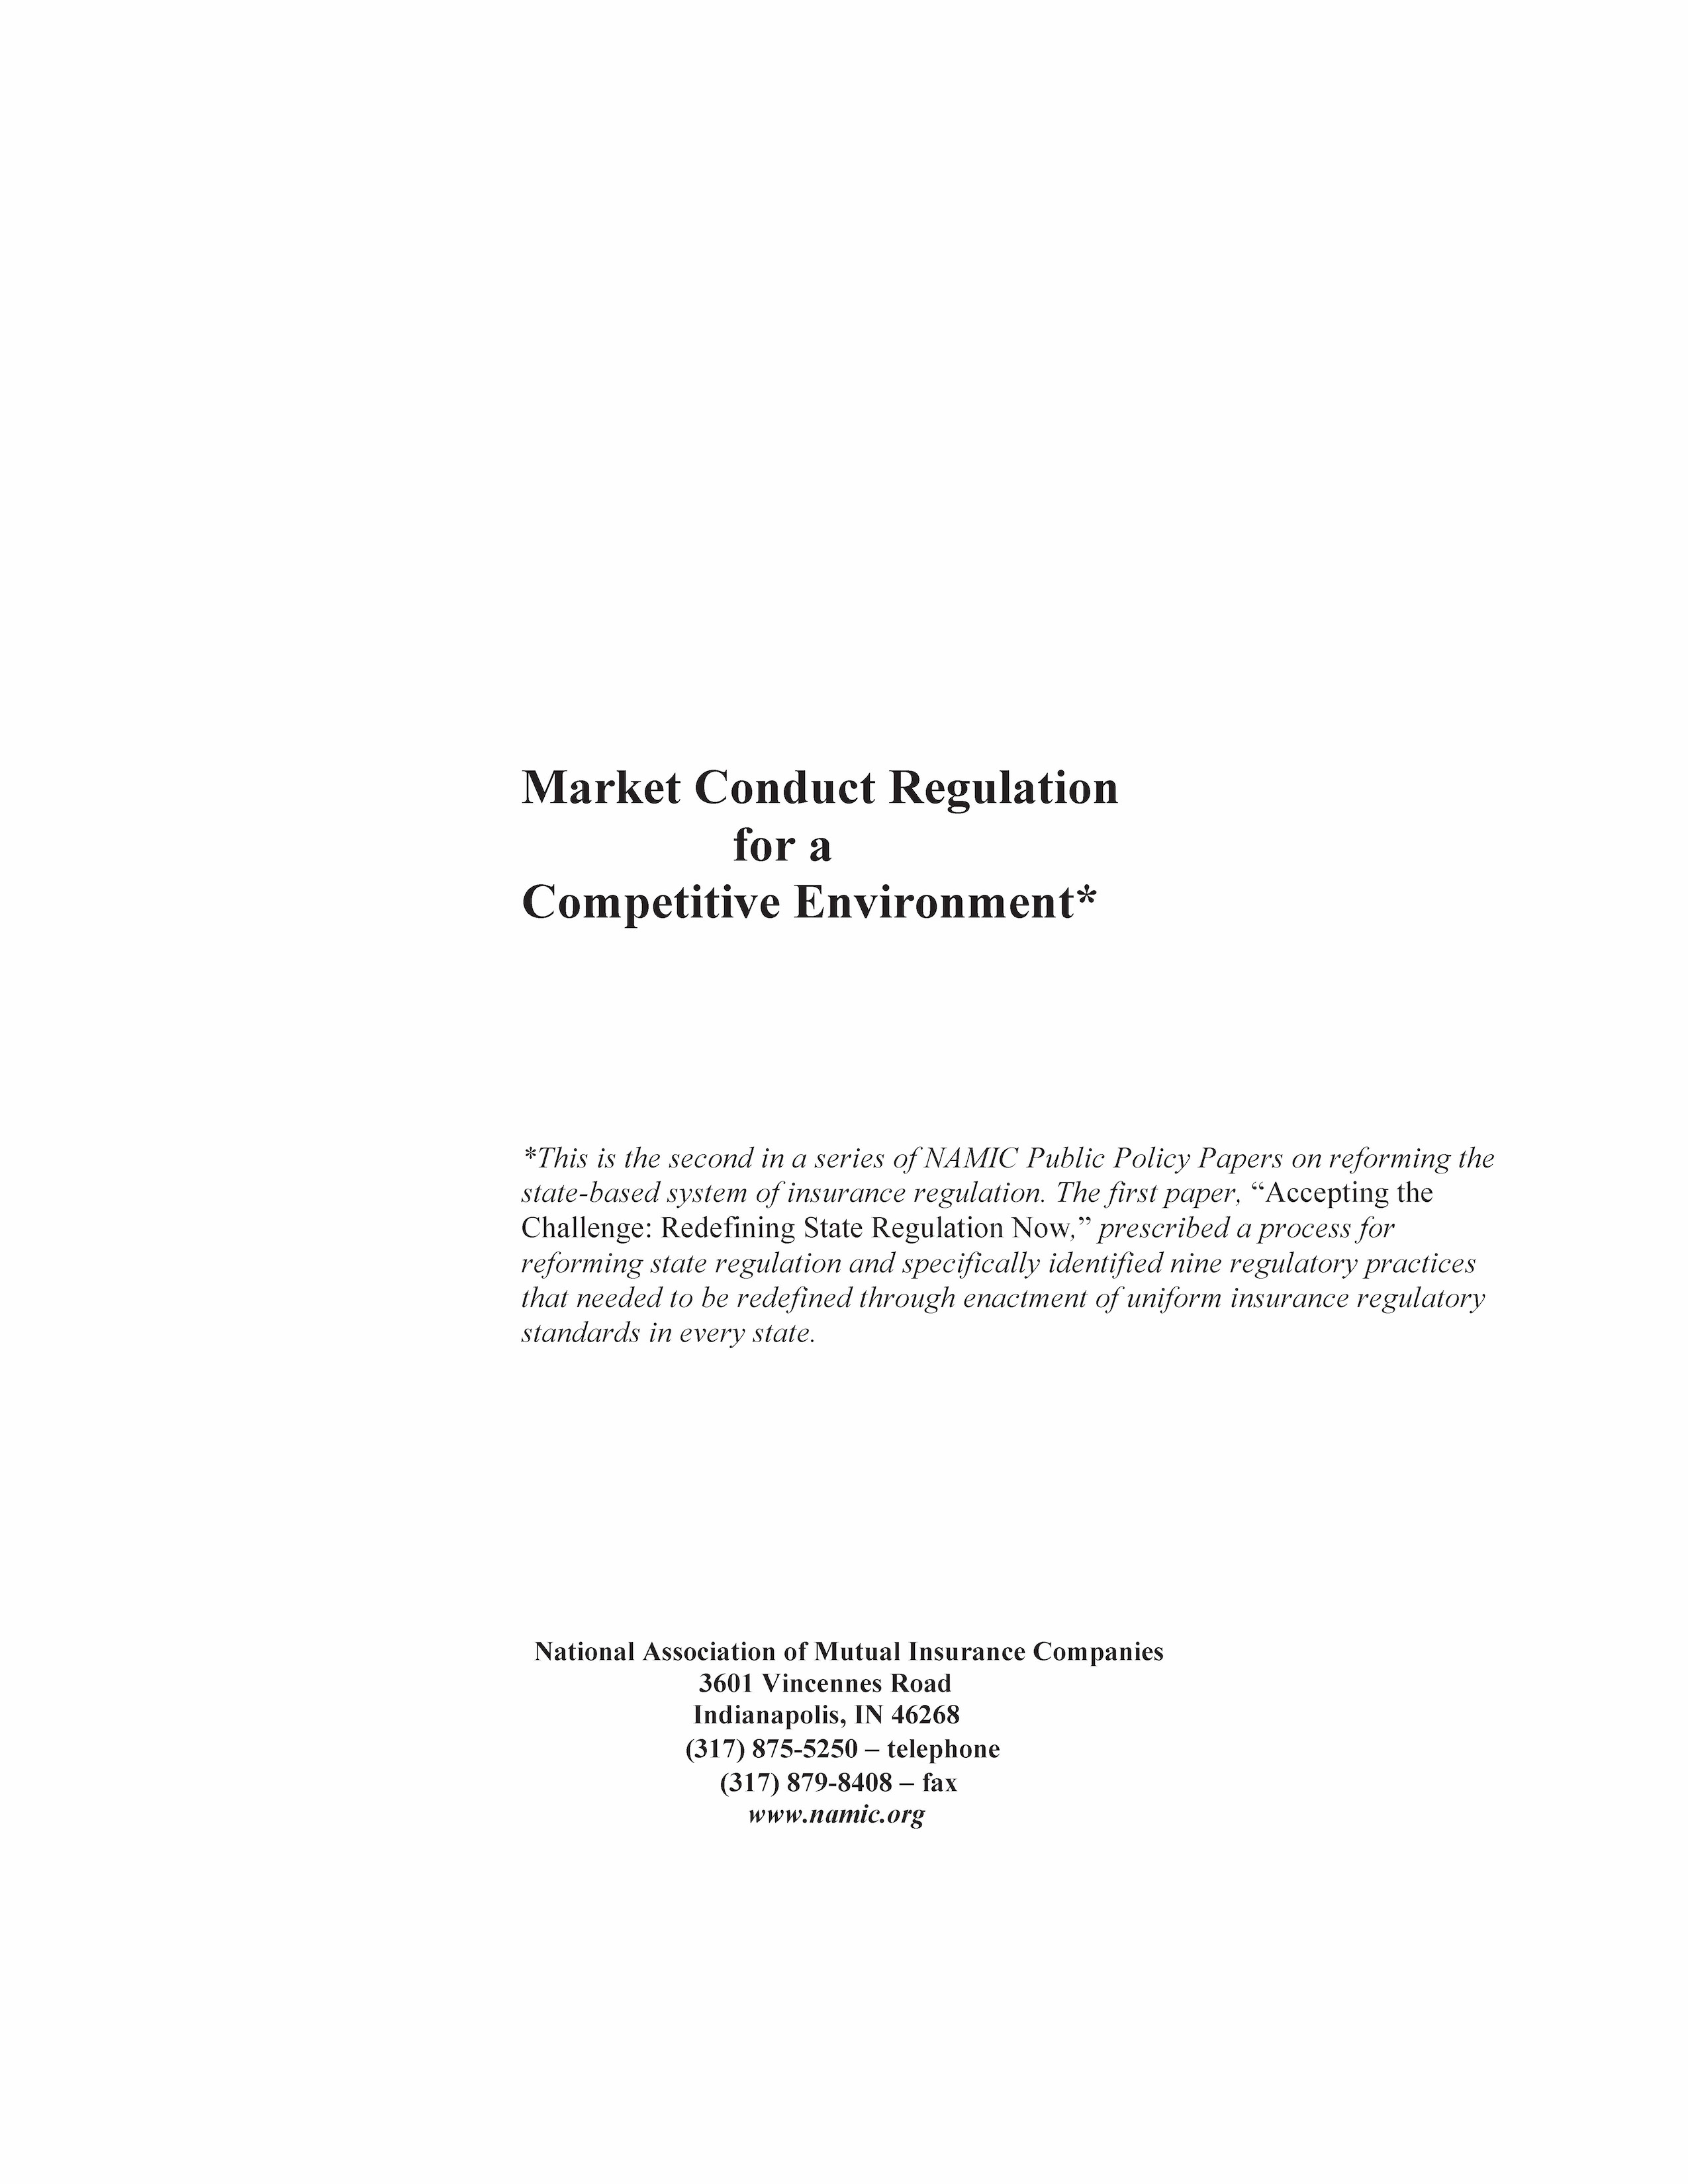 Market Conduct Regulation for a Competitive Environment PDF